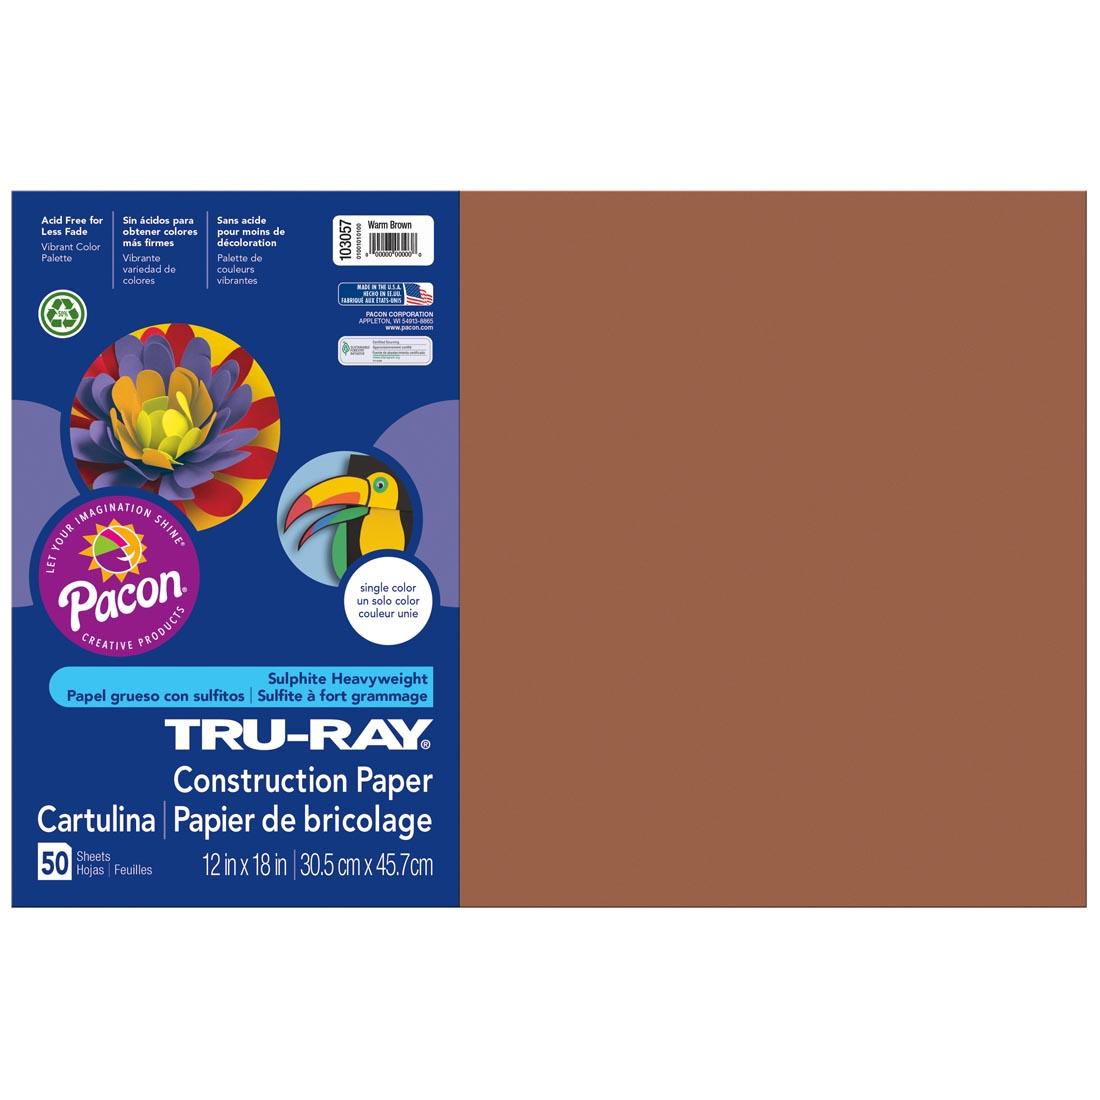 Warm Brown Tru-Ray Construction Paper